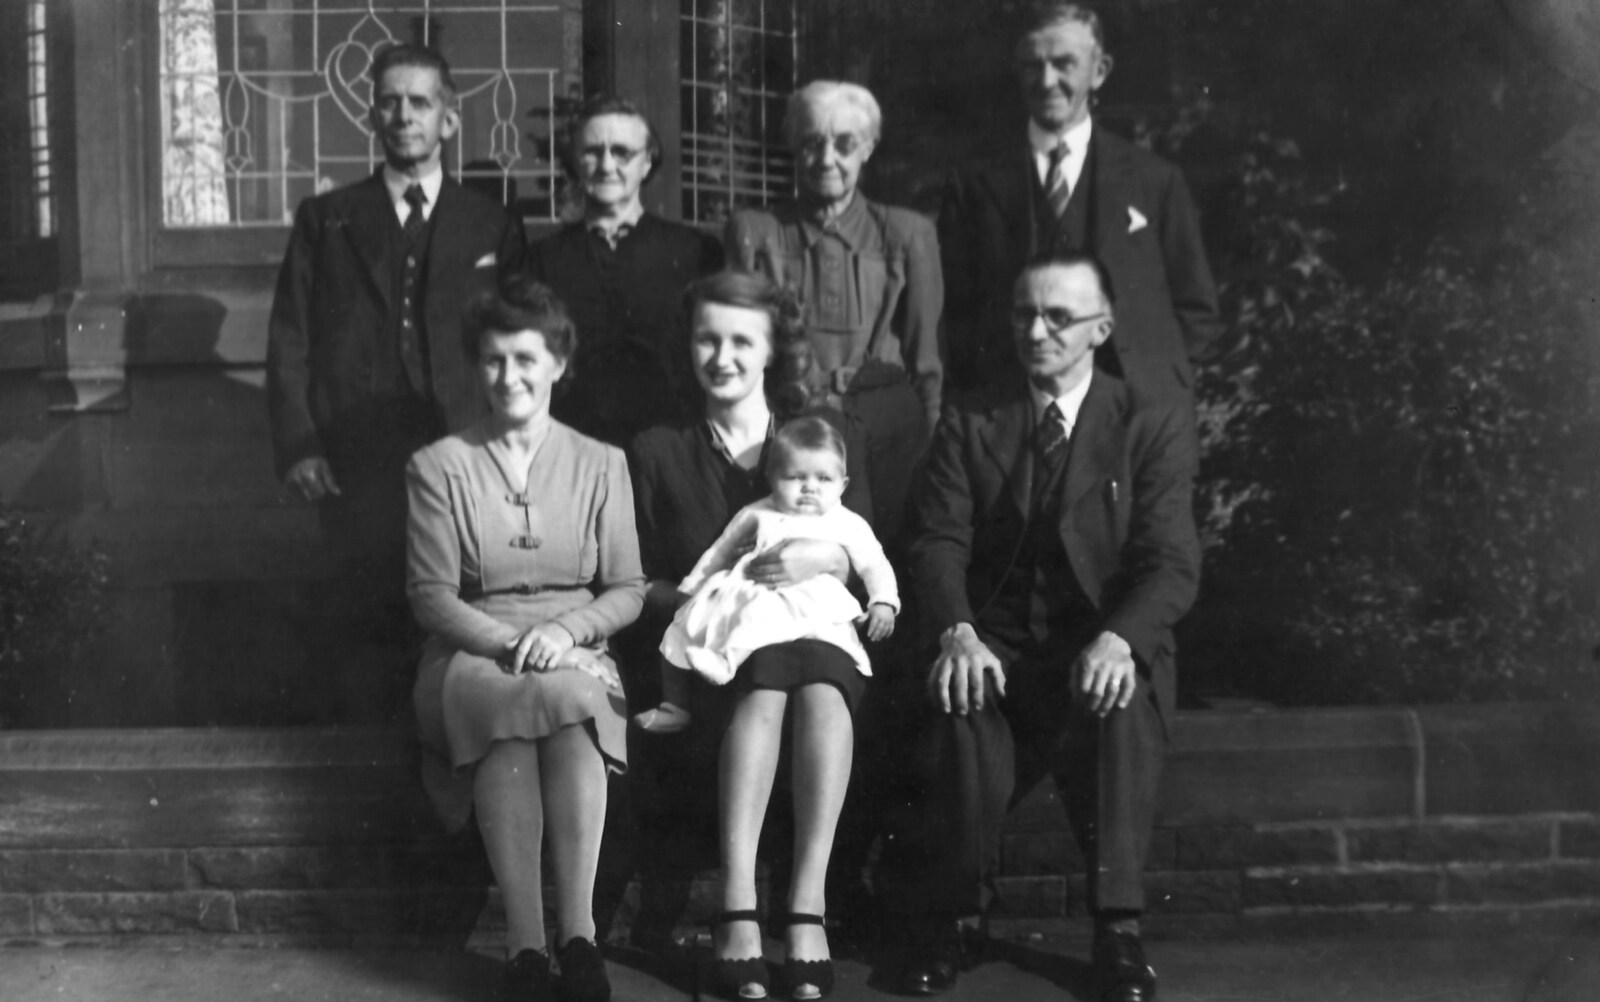 Janet as a baby, with the family from Family History: The 1940s and 1950s - 24th January 2020